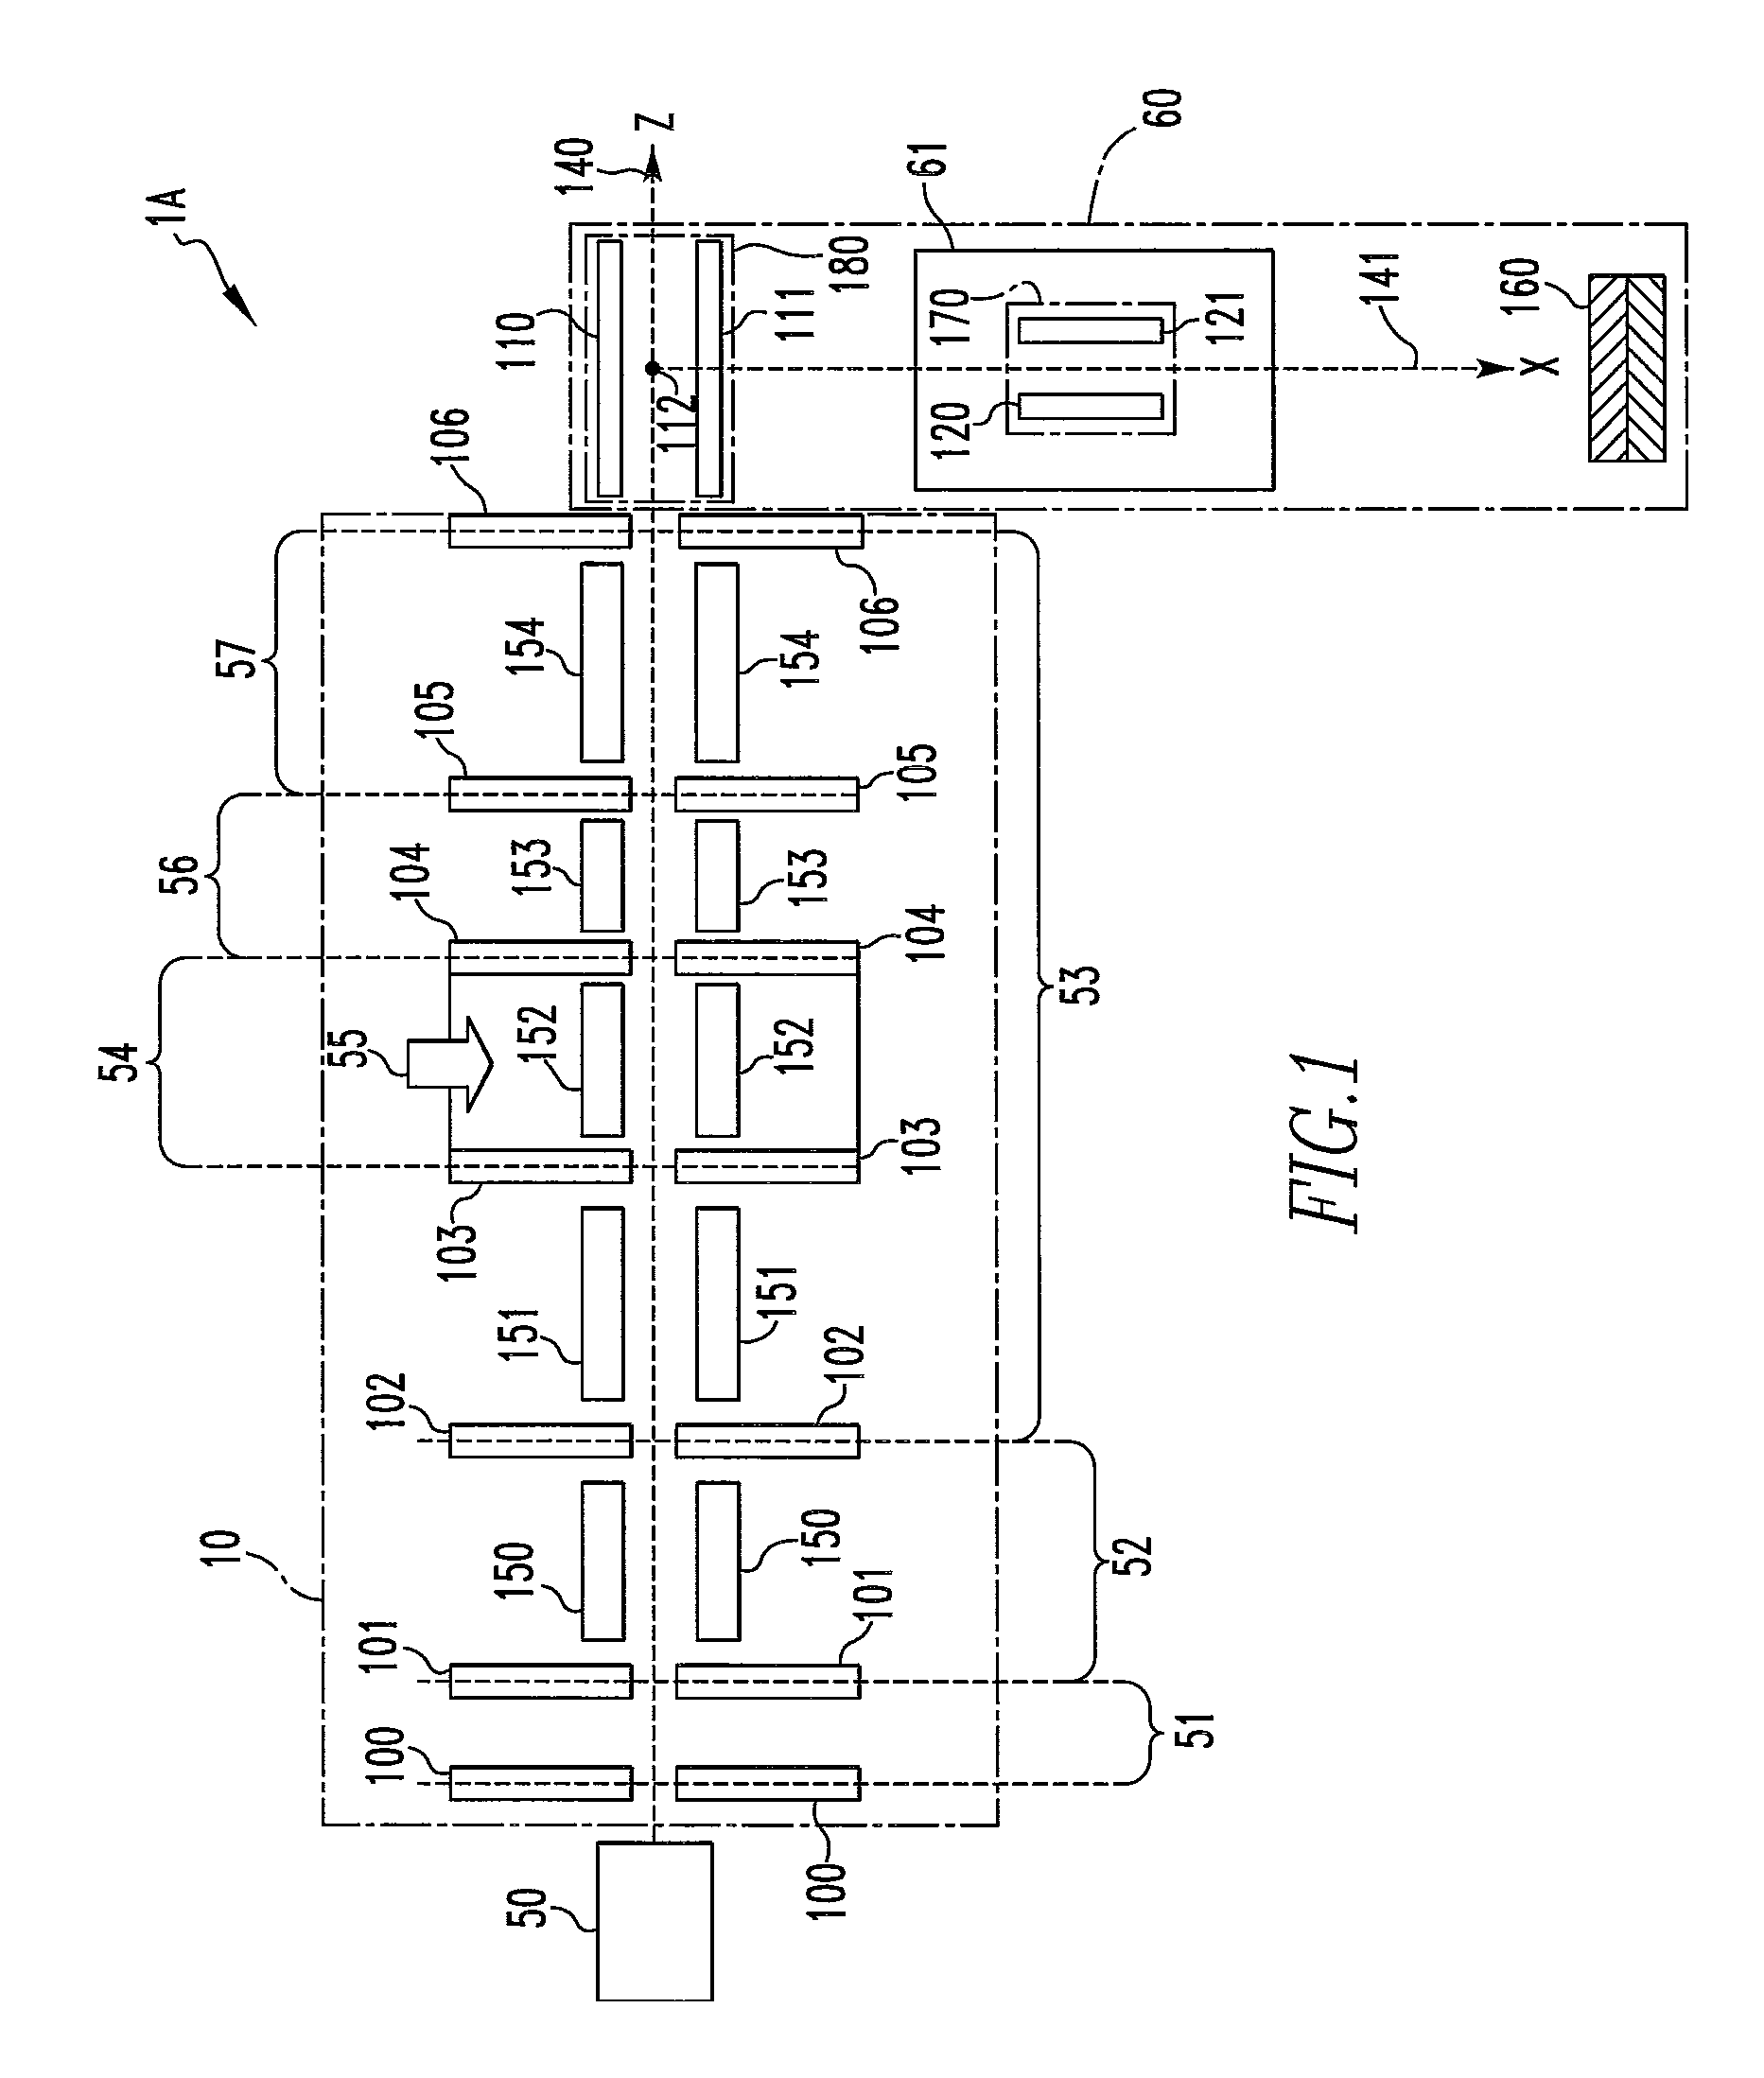 Orthogonal acceleration time-of-flight spectrometer having steady potential and variable potential transport regions